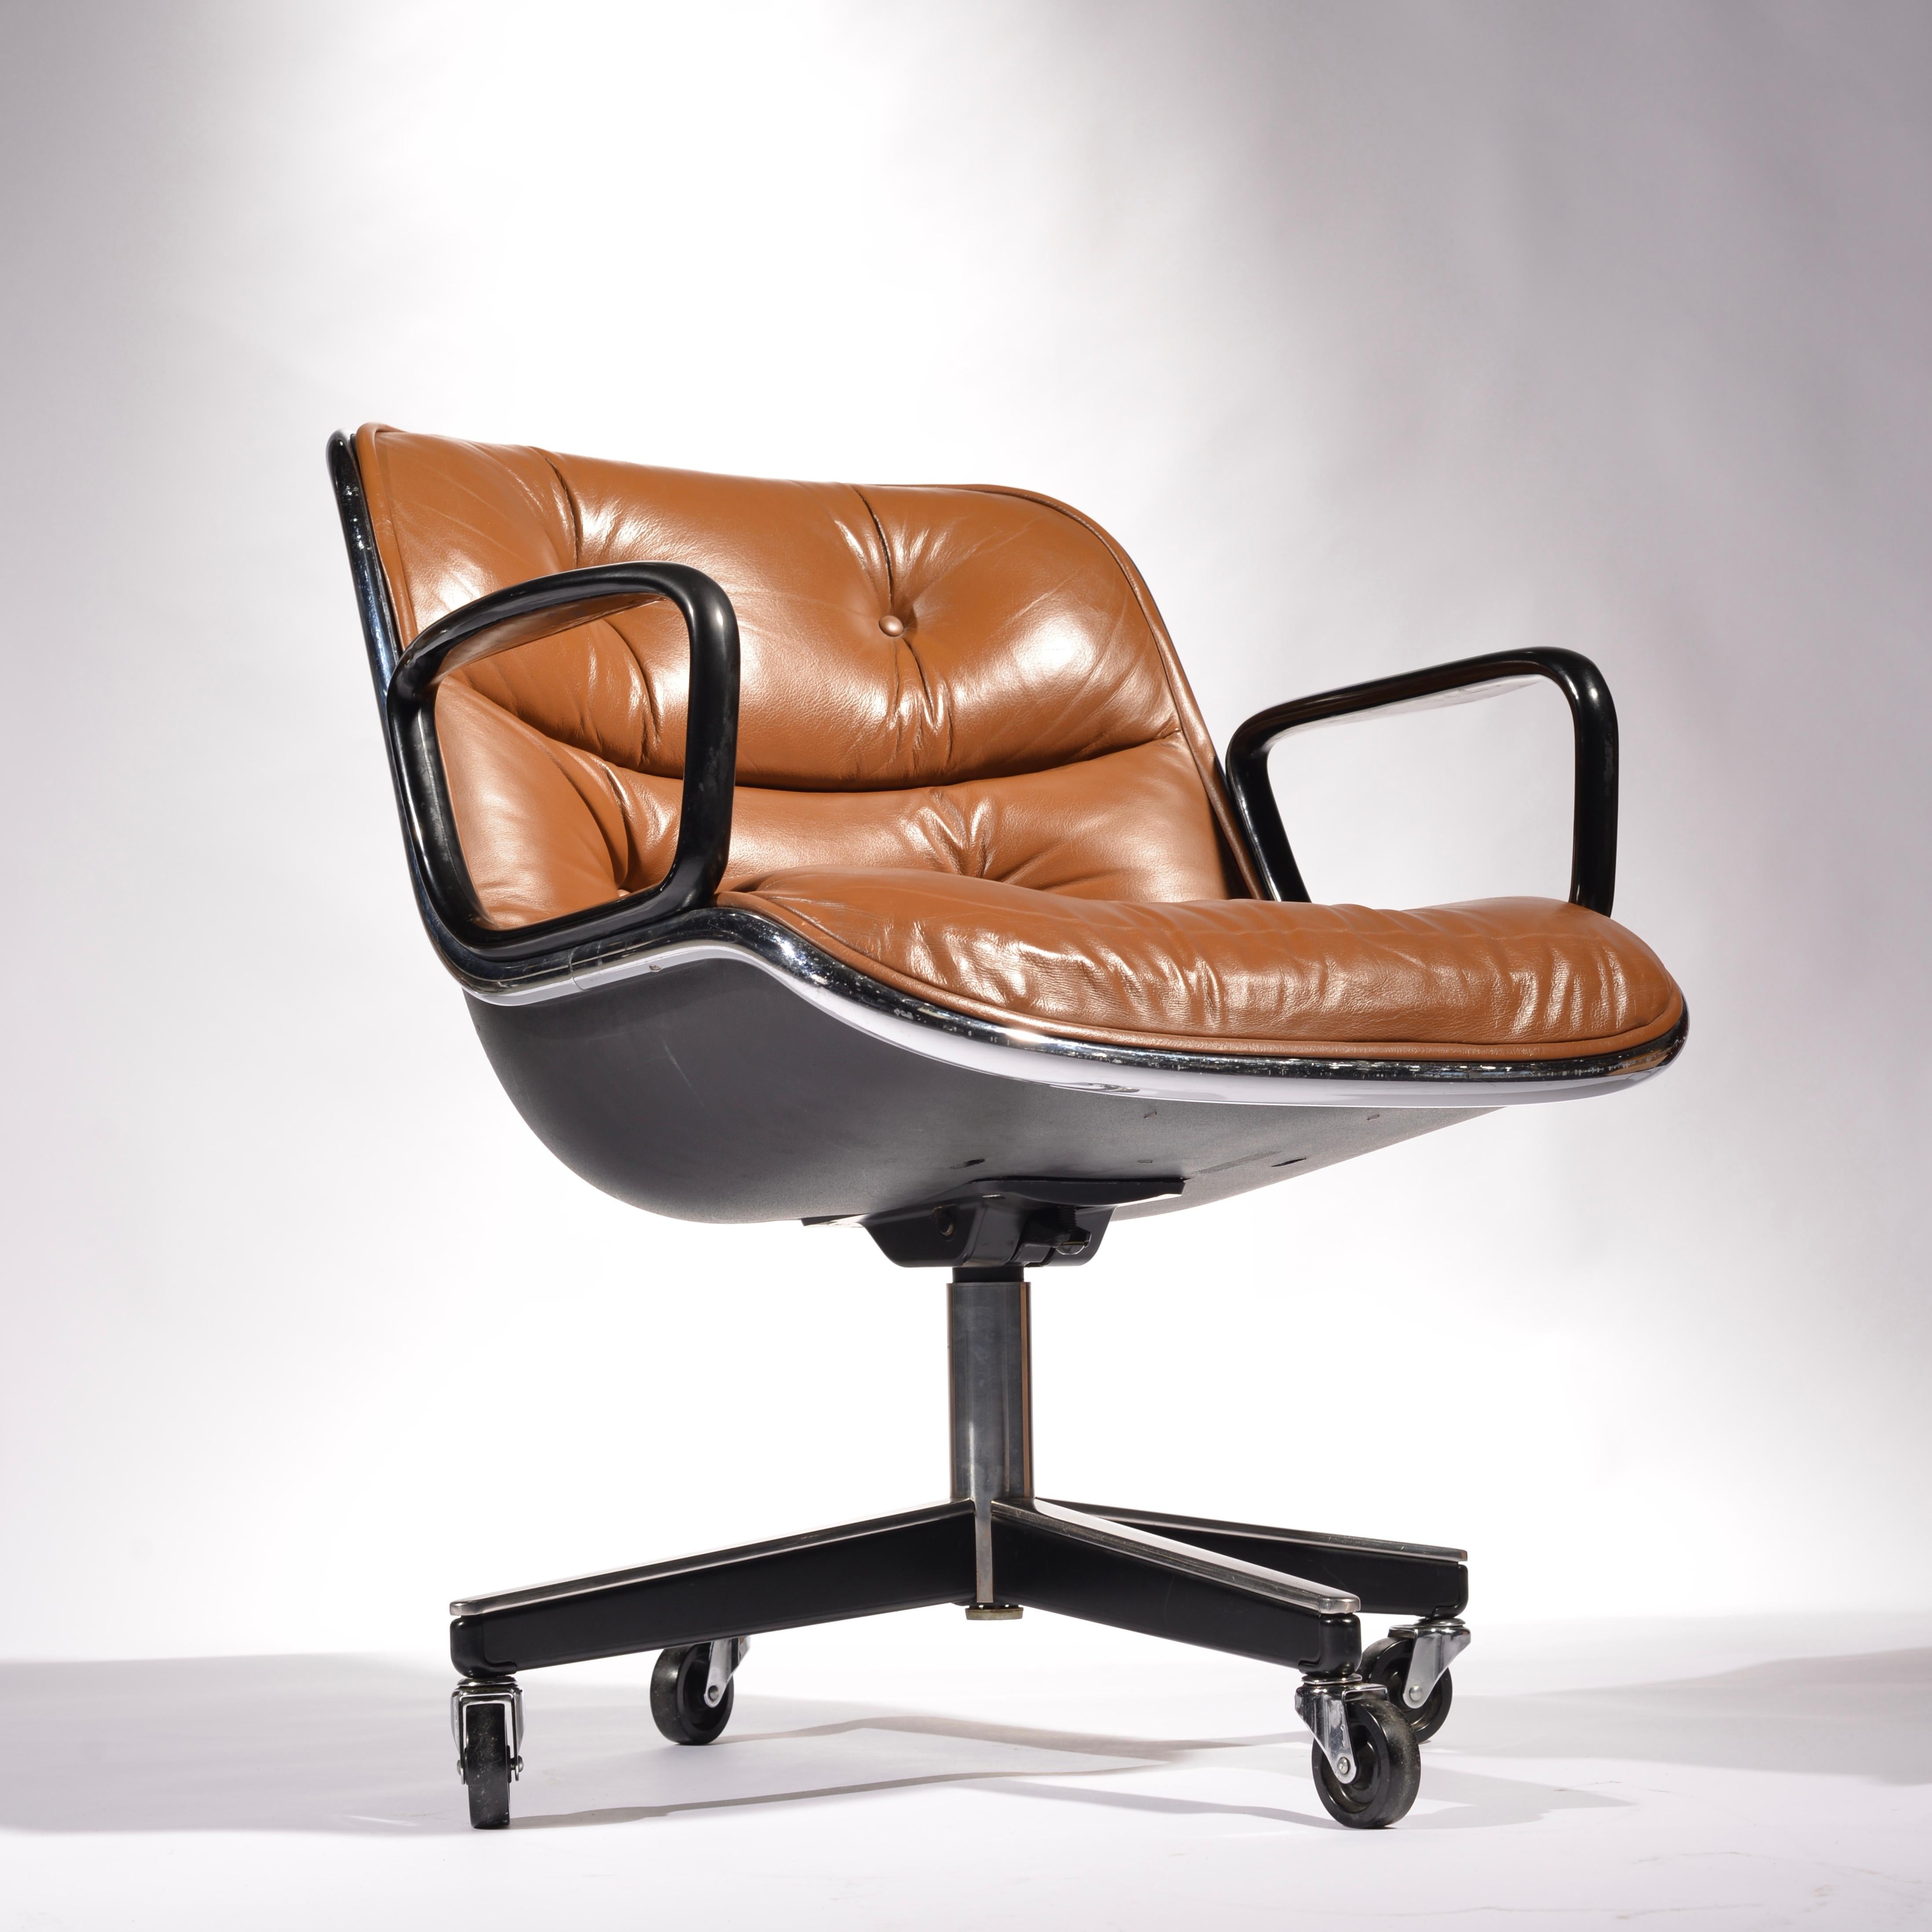 American 10 Charles Pollock Executive Desk Chairs for Knoll in Cognac Leather